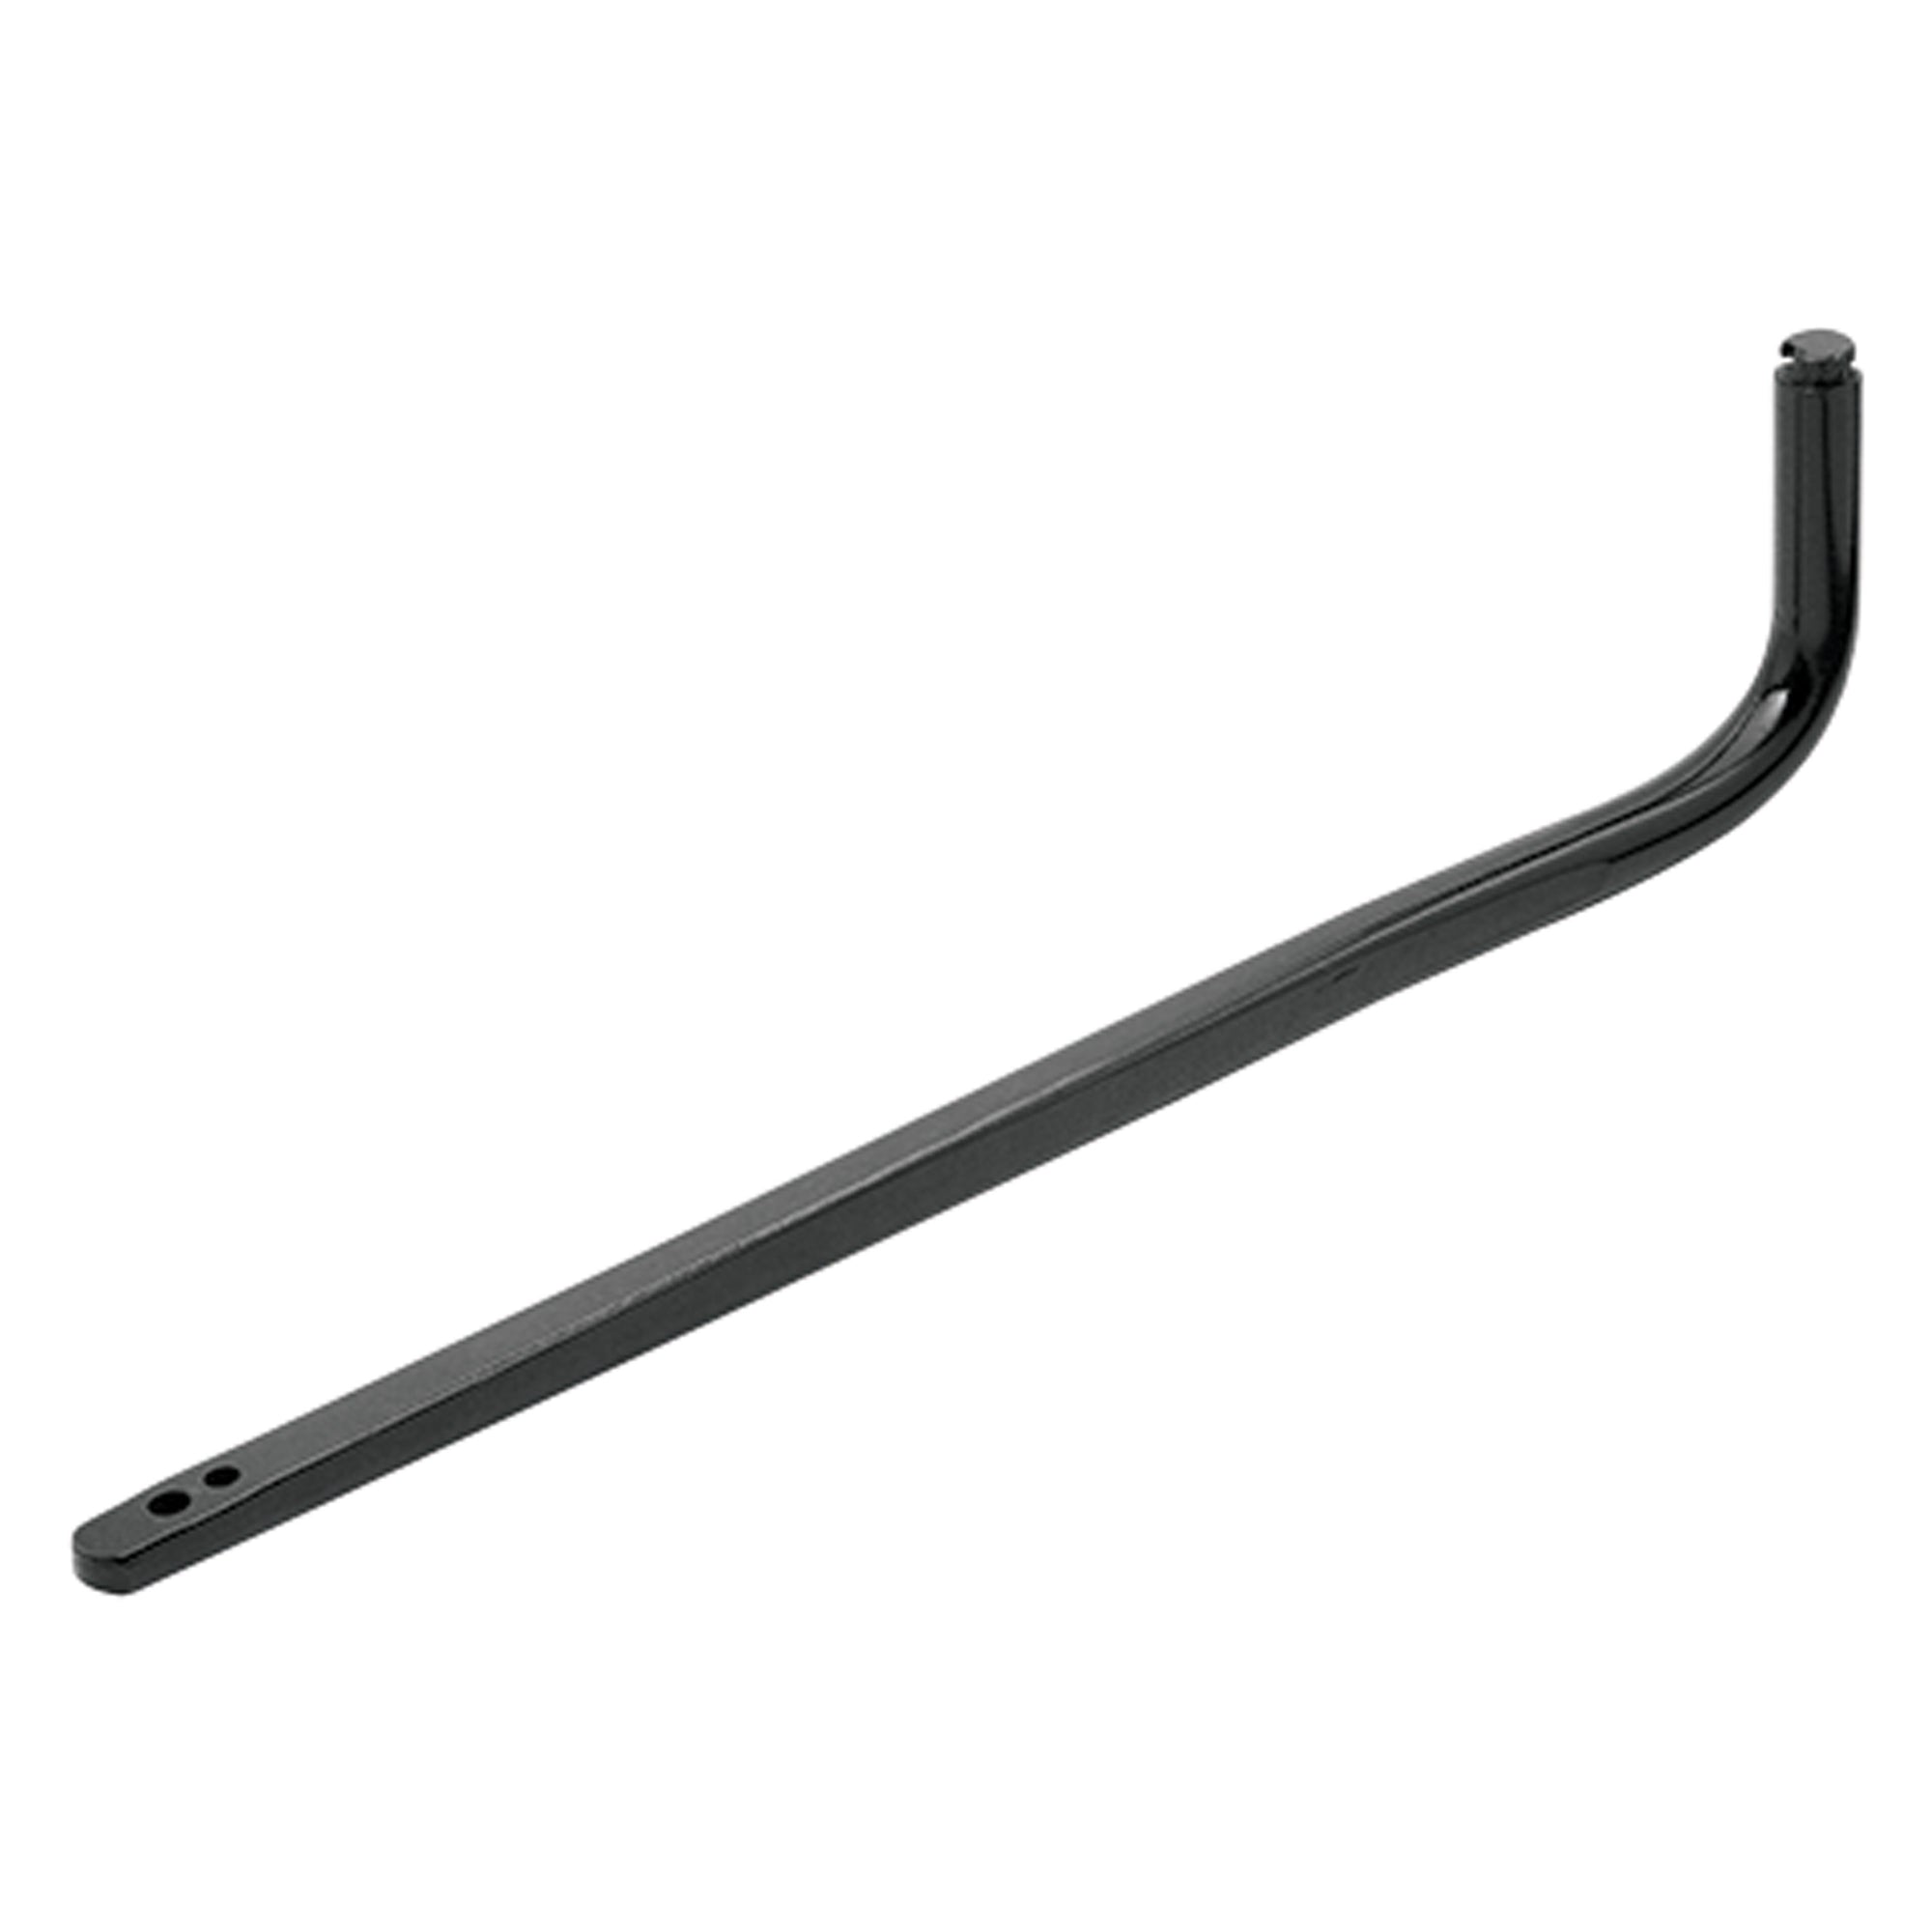 Reese 58337 RB2 Weight Distributing Hitch Spring Bar - 800 lbs.